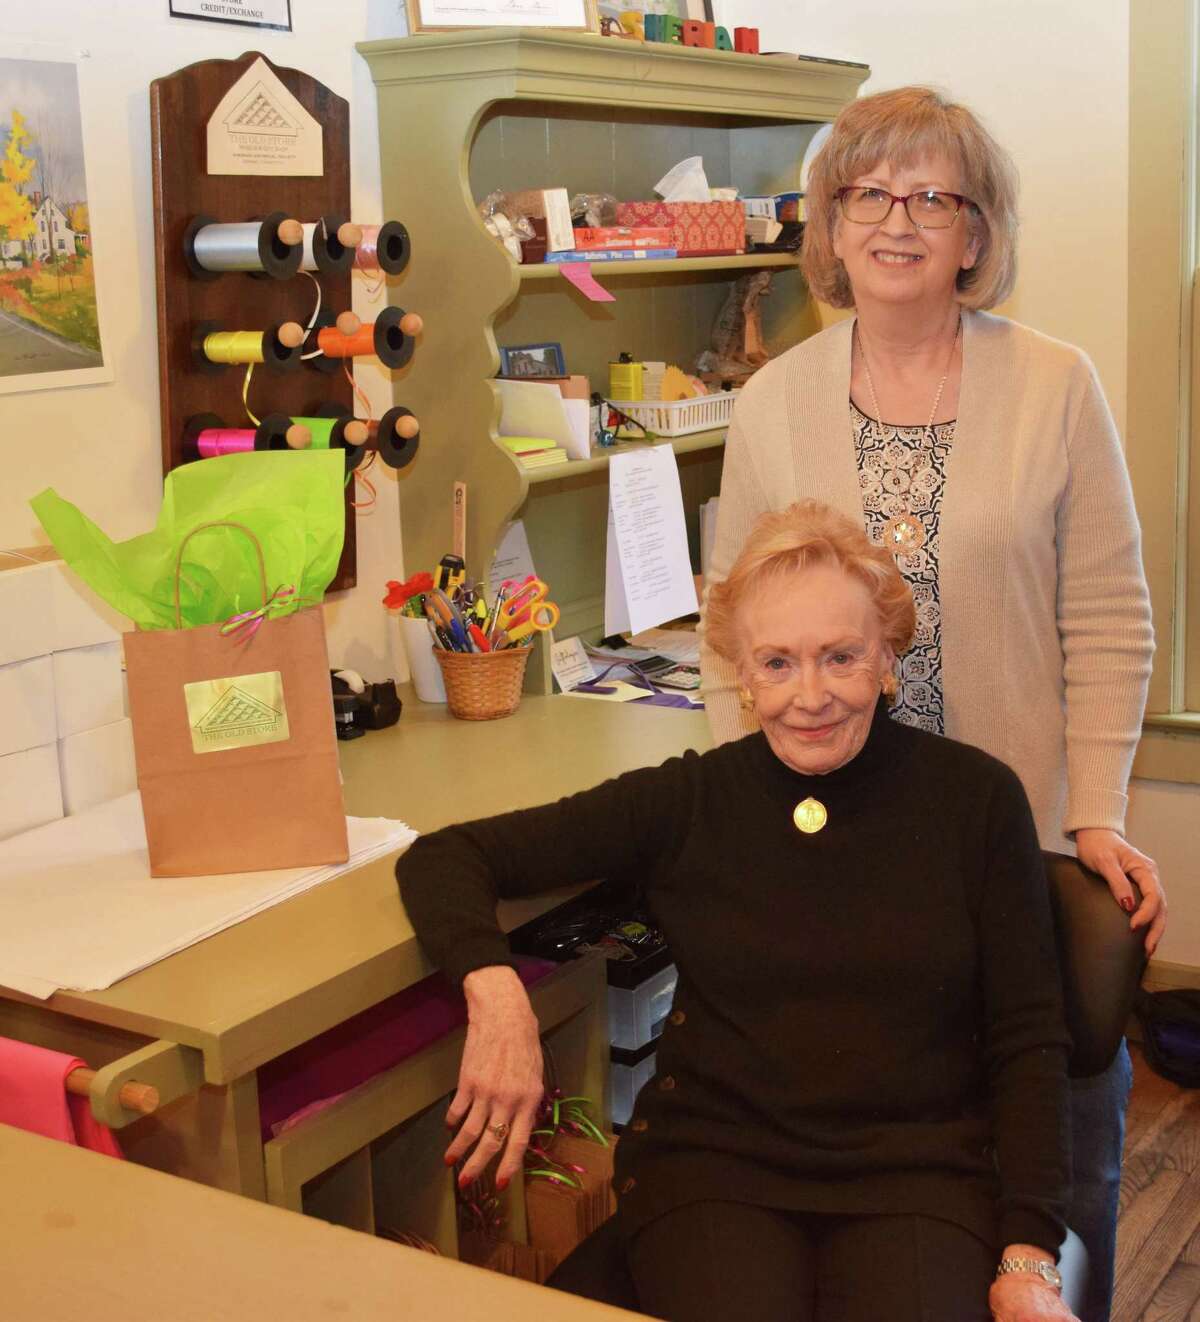 The Old Store Gift Shop & Museum in Sherman is celebrating its 20th anniversary this year, in 2018. The shop's co-managers are Moira Kelly, seated, and Lisa Cilio.